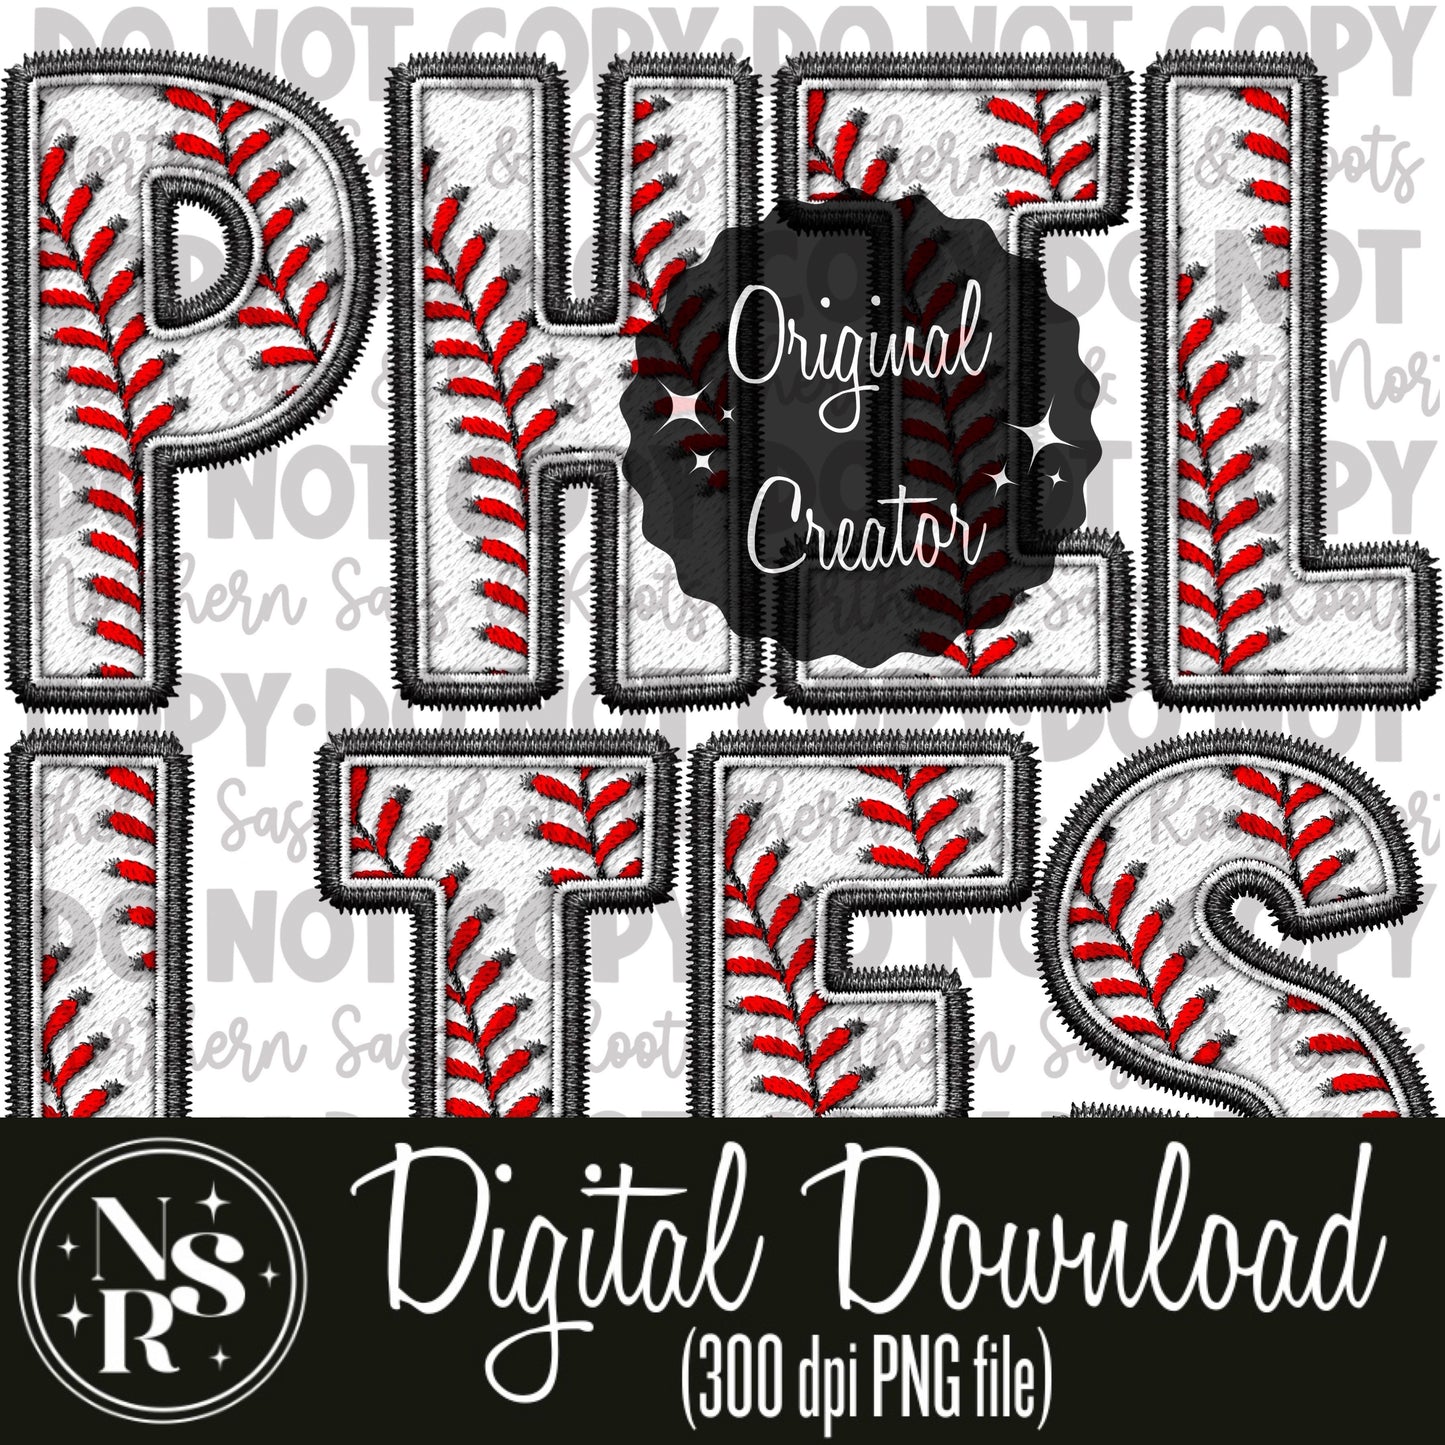 PHILLIES Baseball Faux Embroidery: Digital Download